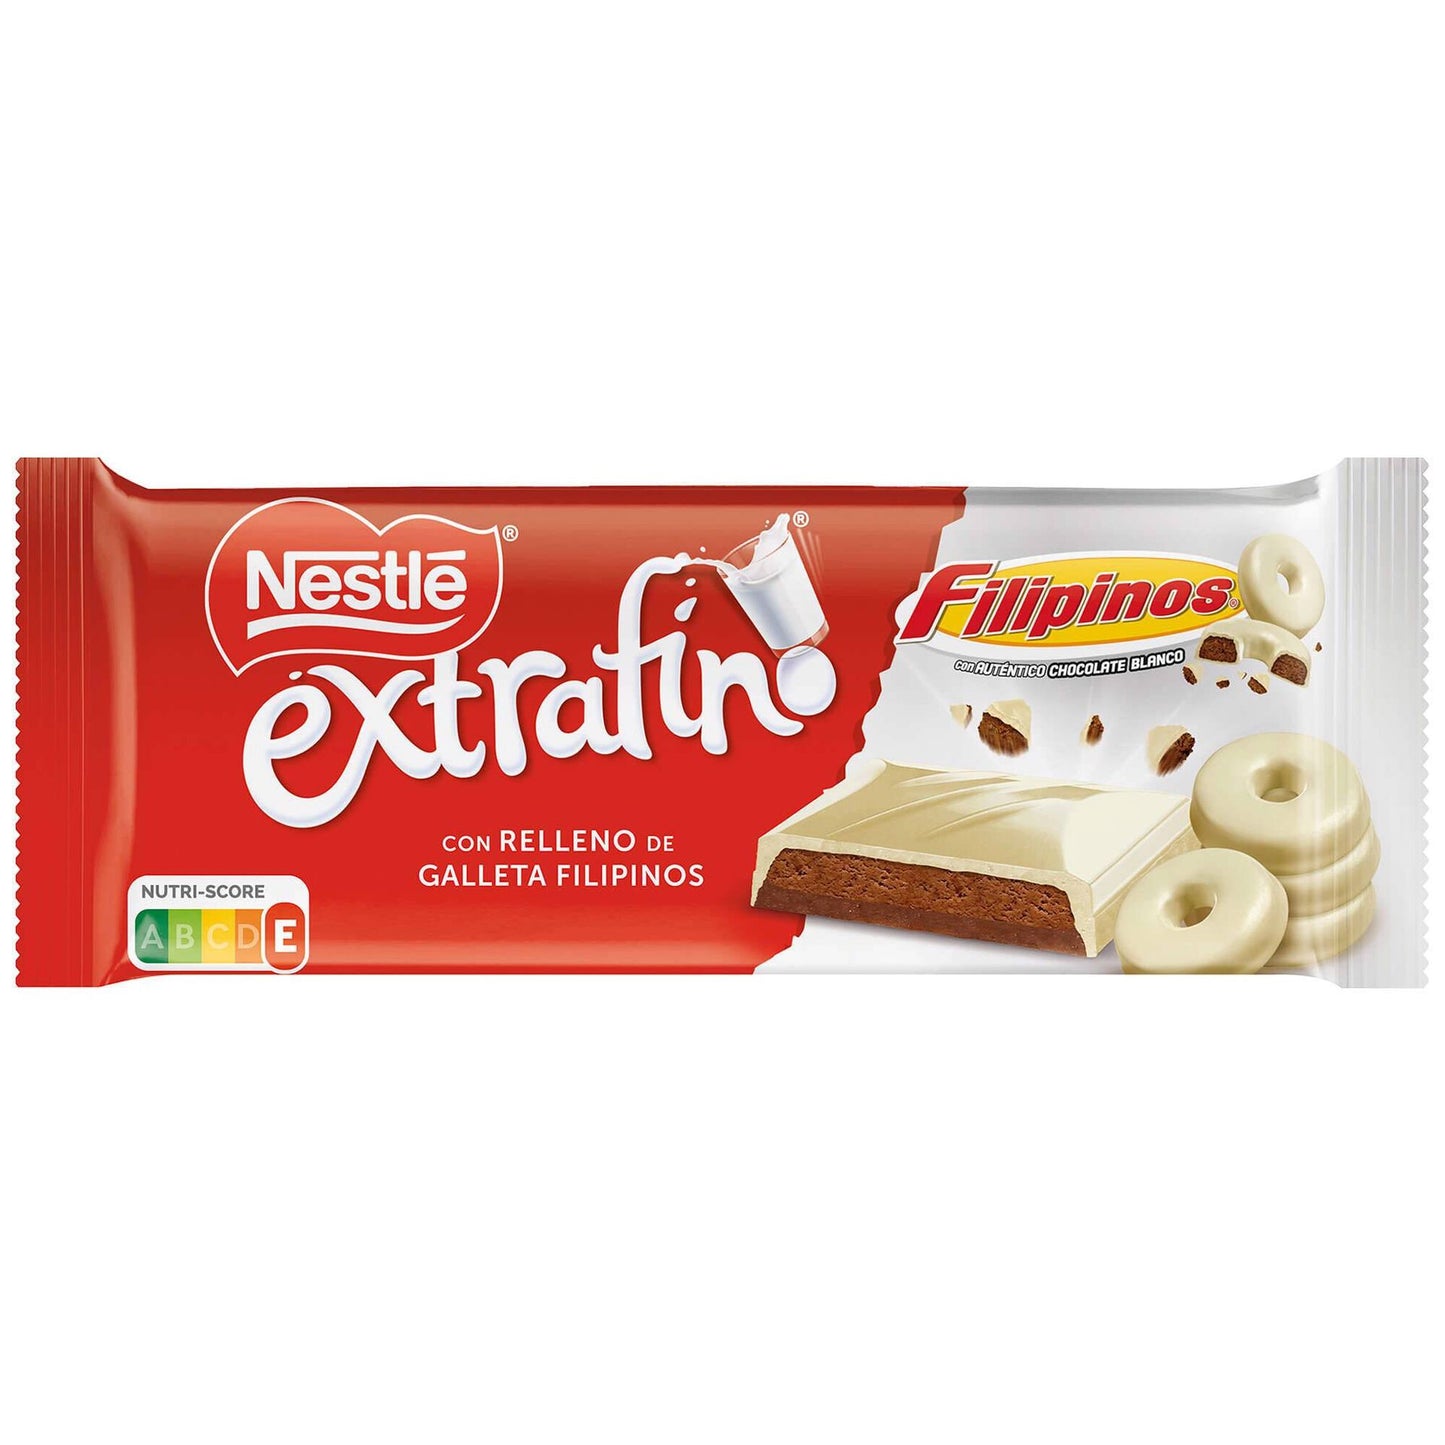 White Chocolate Tablet and Filipino Cookie Filling Nestlé 84g